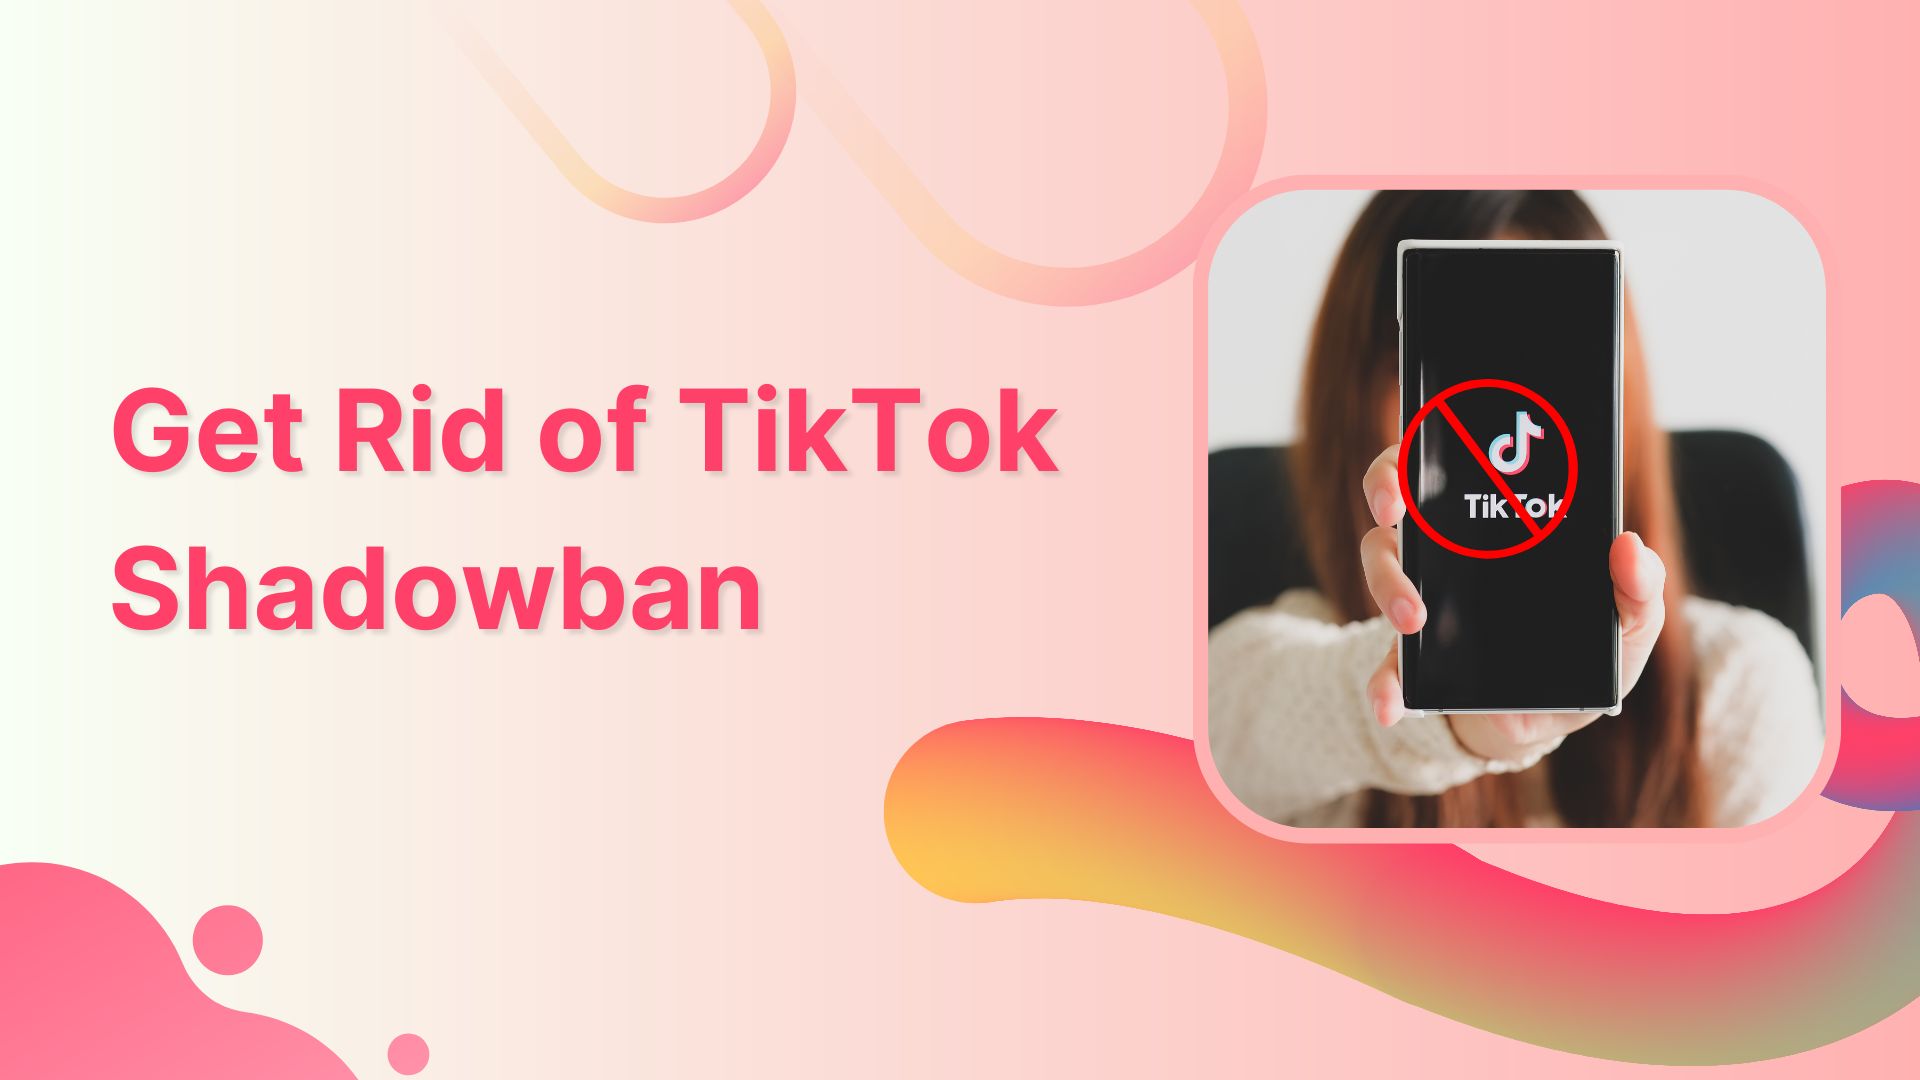 How To Get Rid Of Shadowban On TikTok?